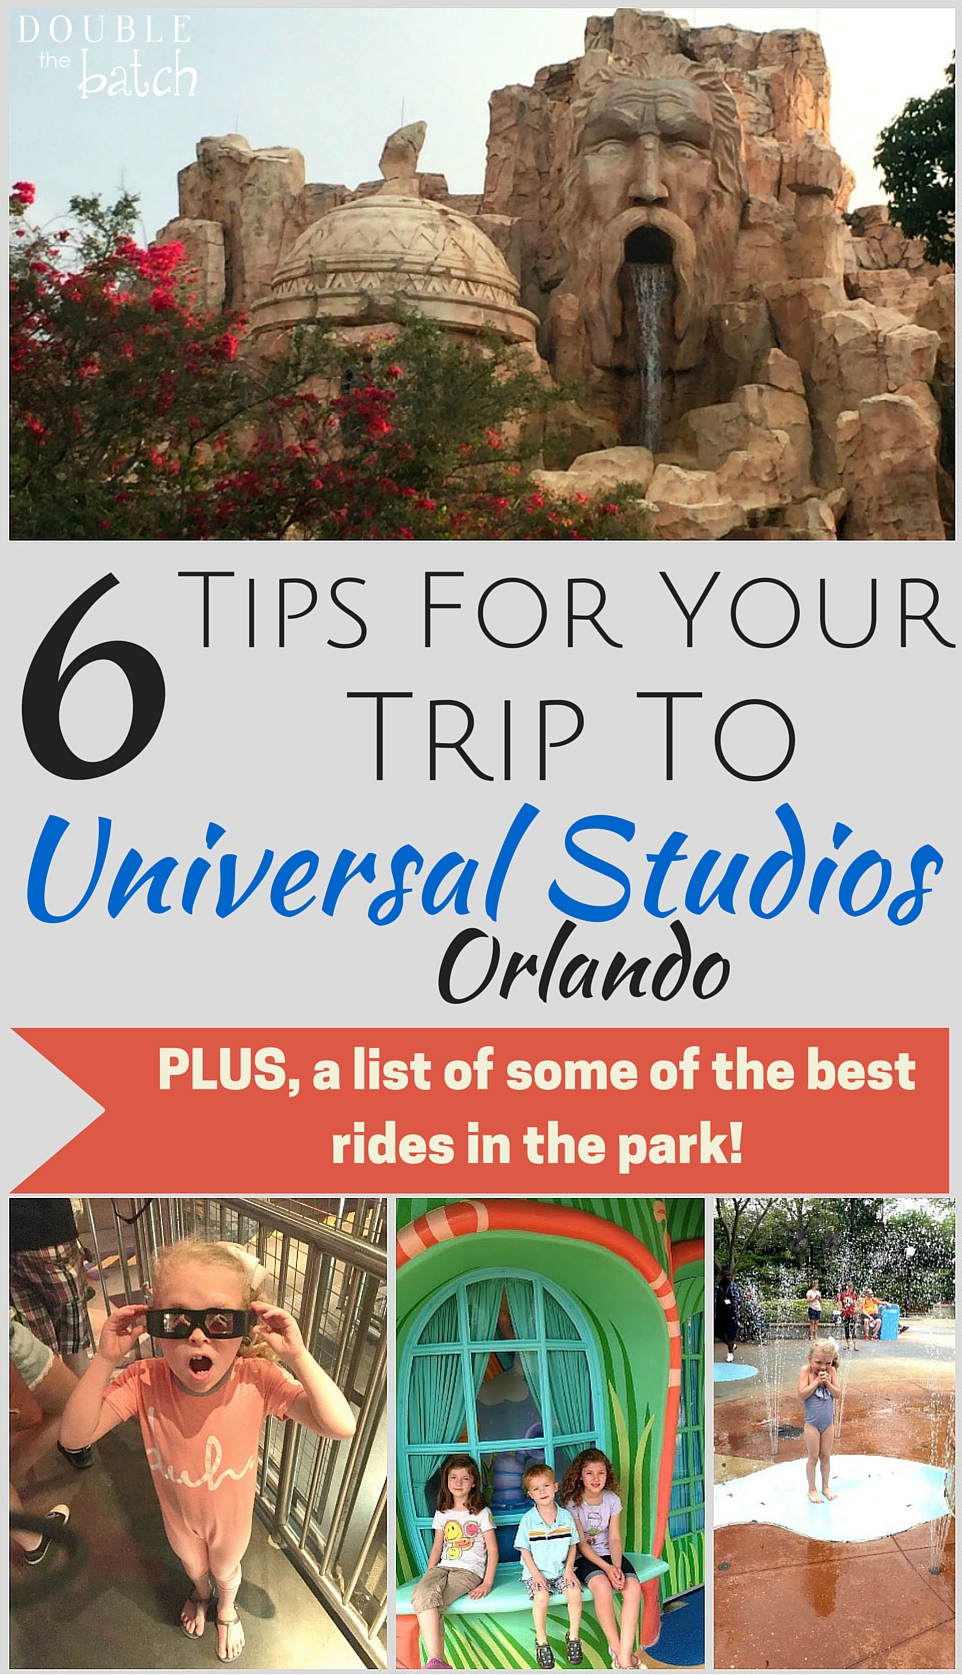 Tips for visiting universal studios orlando a plus a list of the best ride! Saving this for our next vacation!